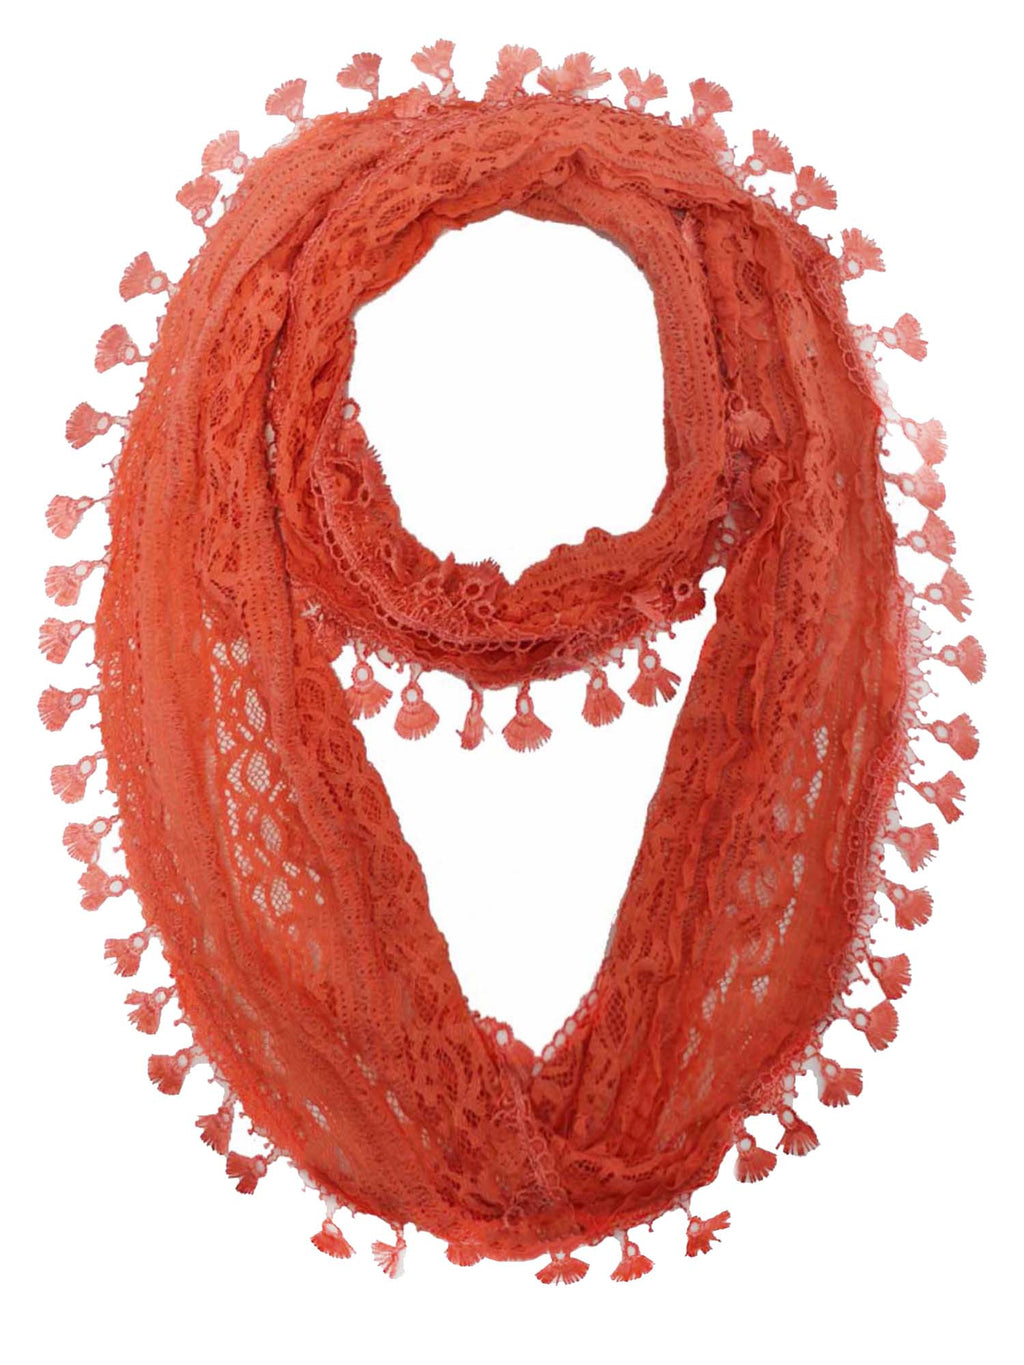 Lace Infinity Scarf With Tassels